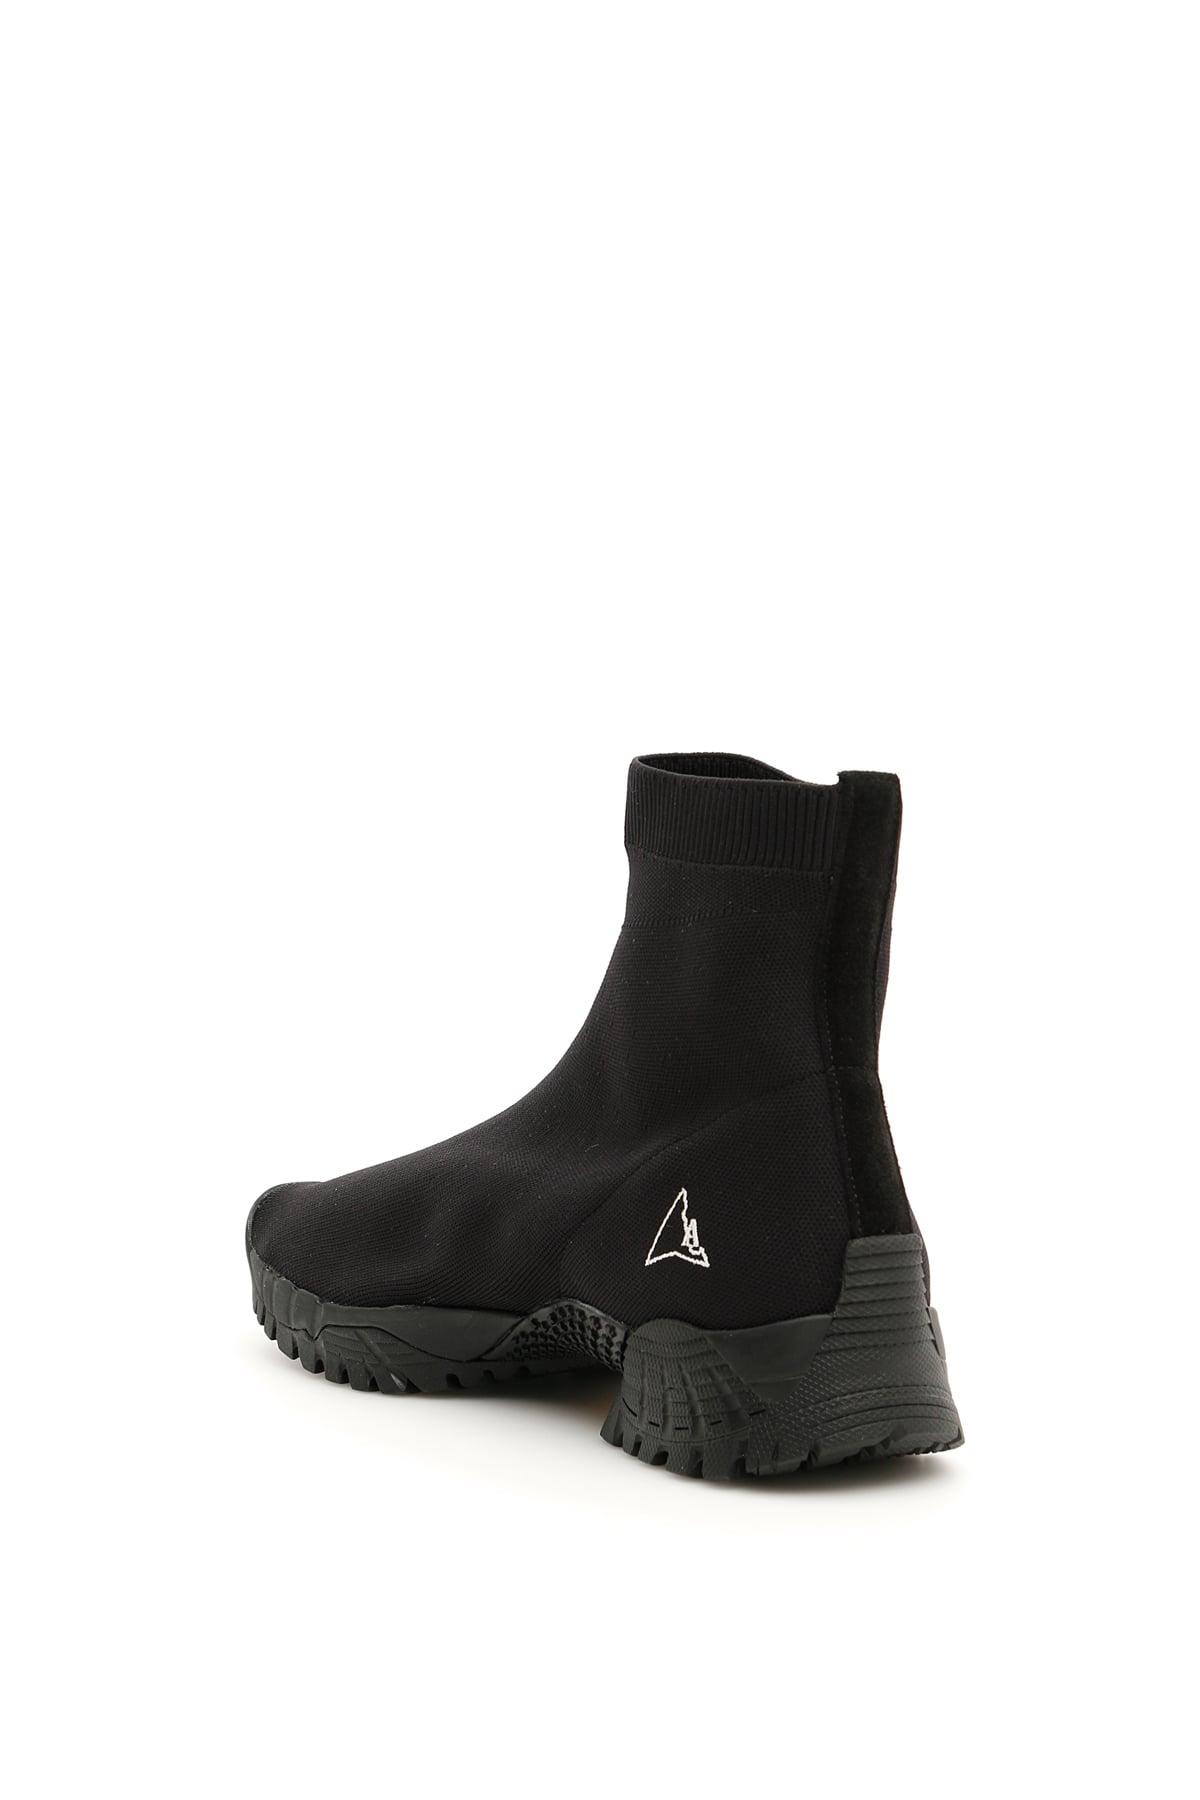 1017 ALYX 9SM Knit Hiking Boots in Black for Men | Lyst